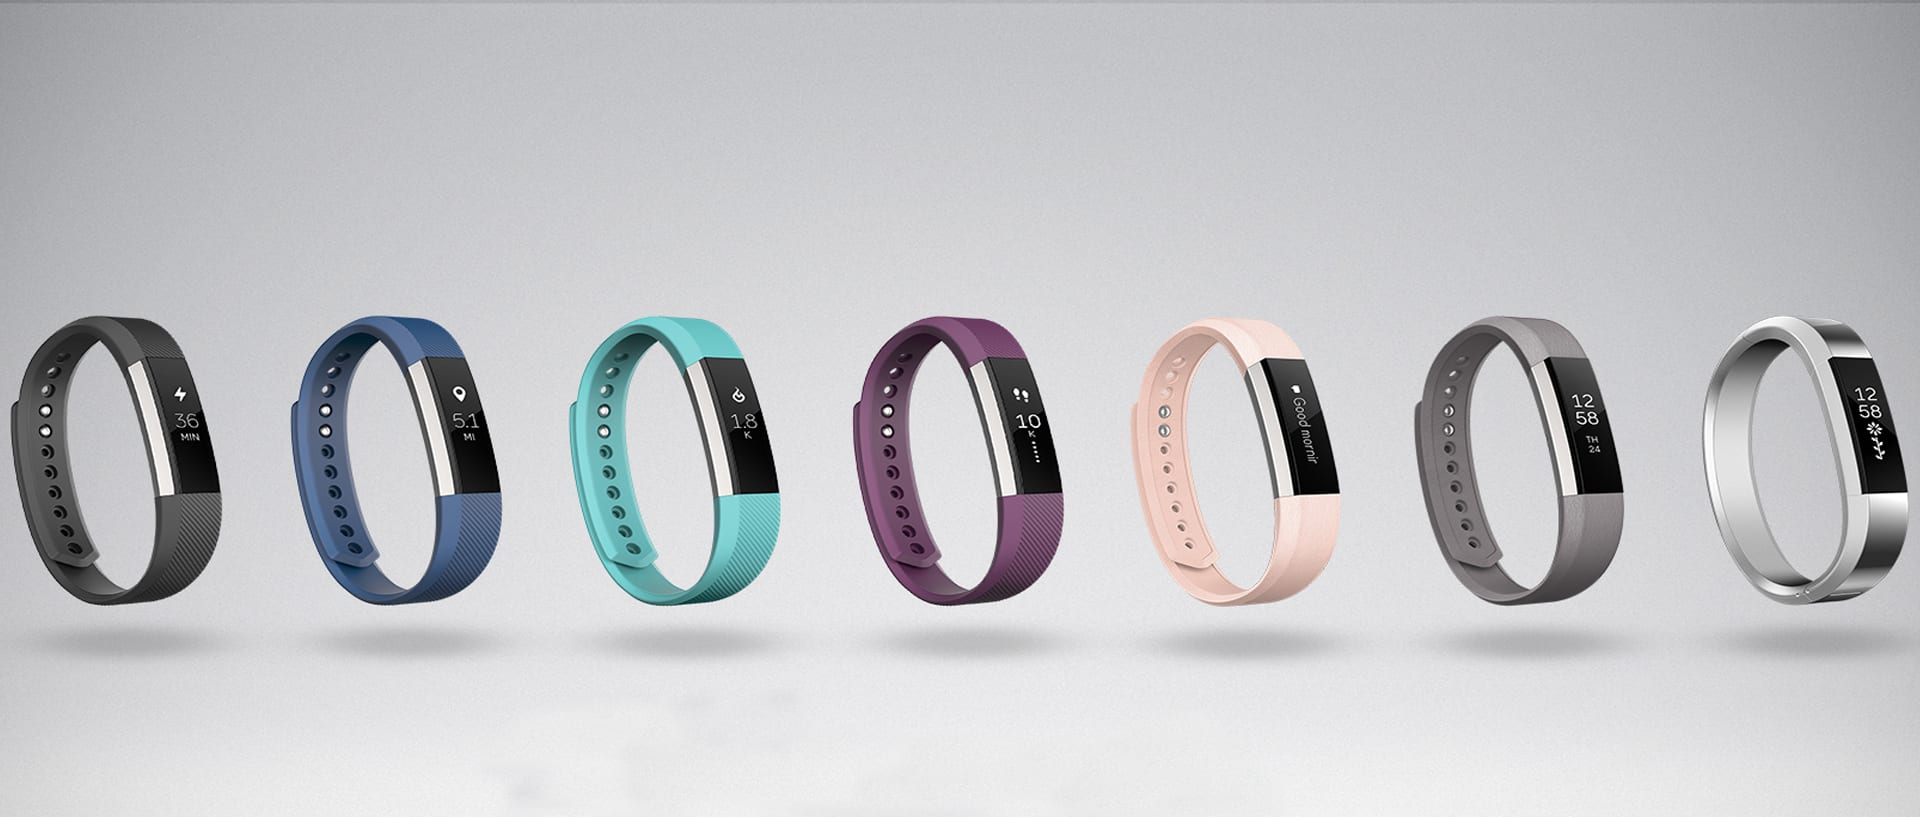 Fitbit's Alta HR fitness trackers in all seven colors